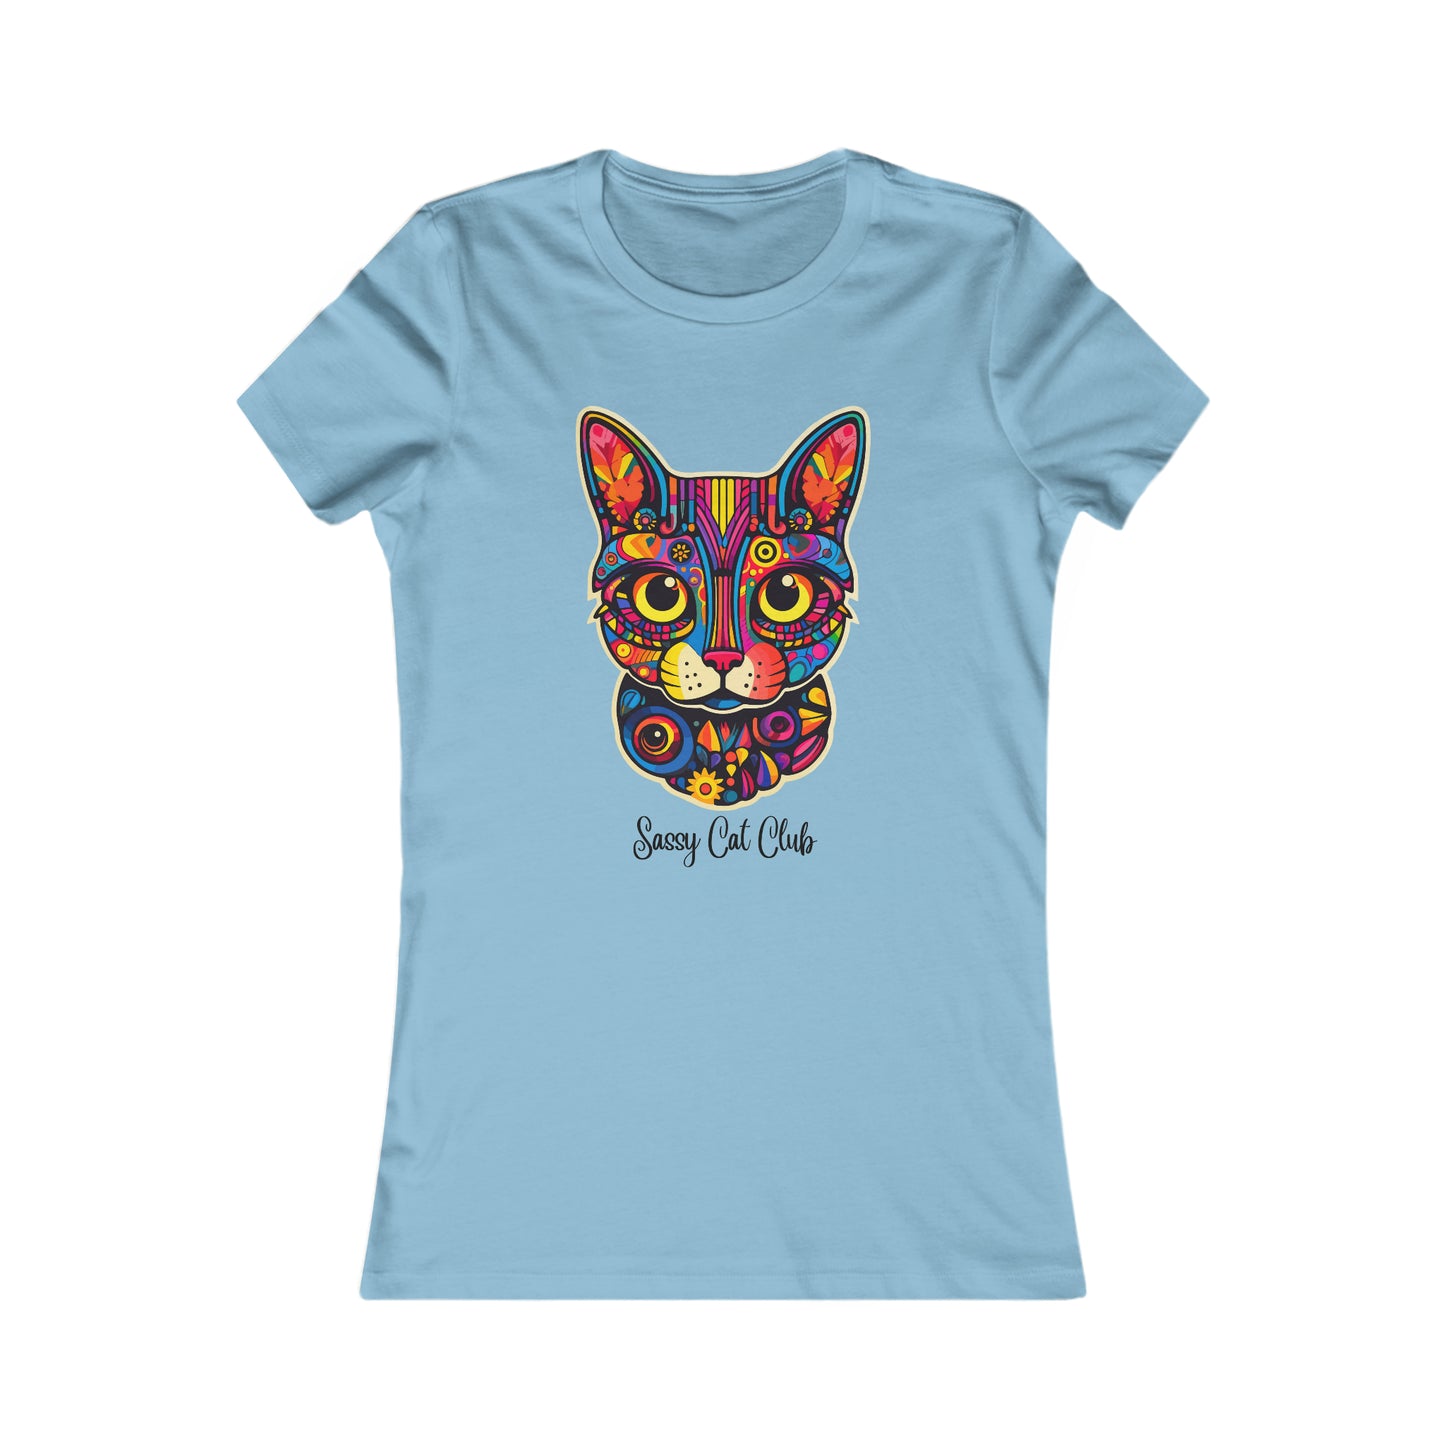 Calling all cat lovers, this “Sassy Cat Club” on this Women's Favorite Tee was designed for you in several colors for you to choose from. Slim fit so please check the size table.